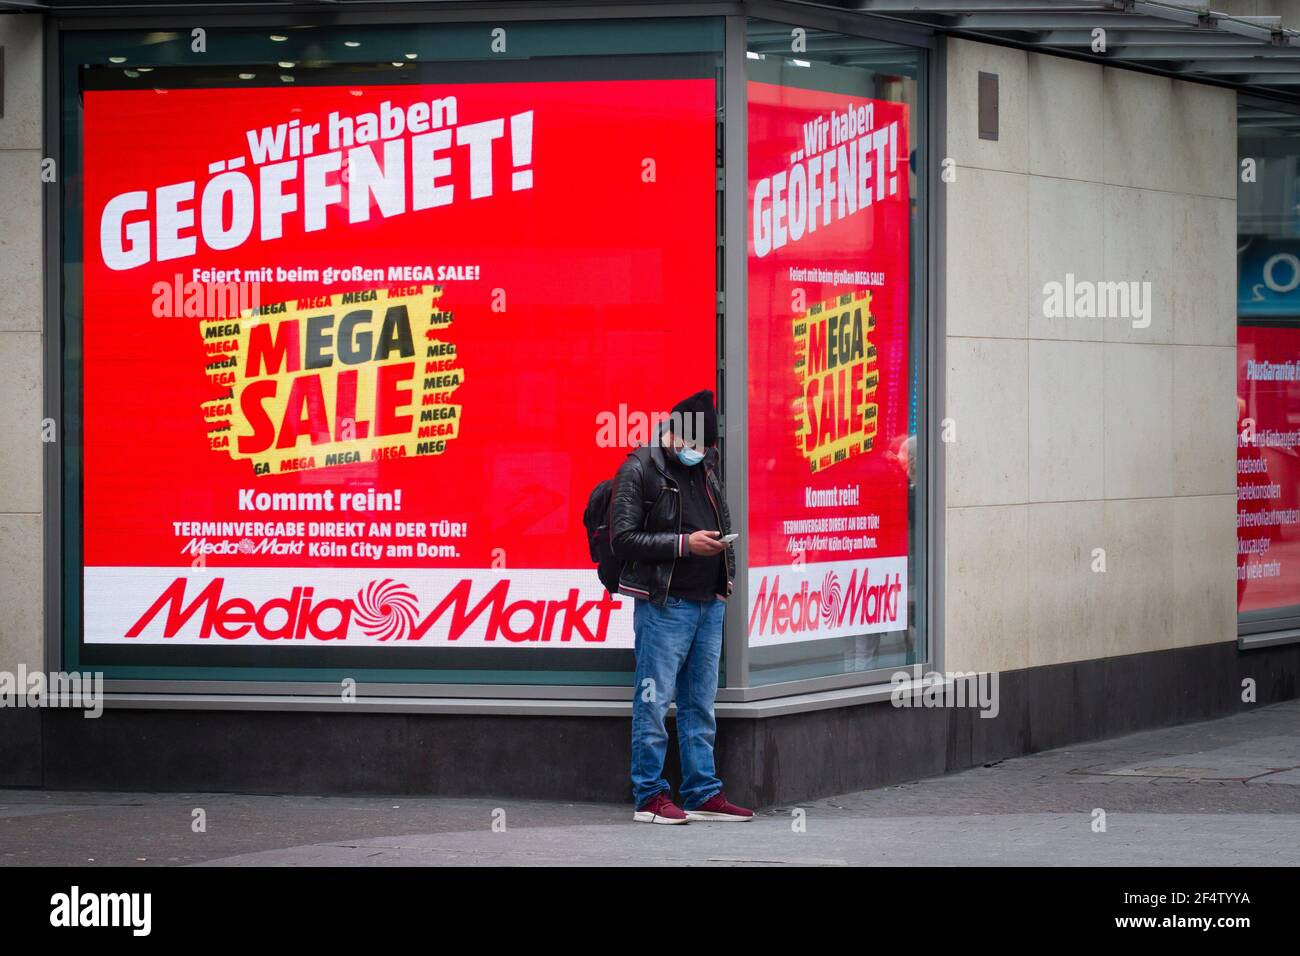 man standing in front of a Media Markt advertising display on the shopping street Hohe Strasse, Cologne, Germany.  Mann steht vor einem Werbedisplay d Stock Photo